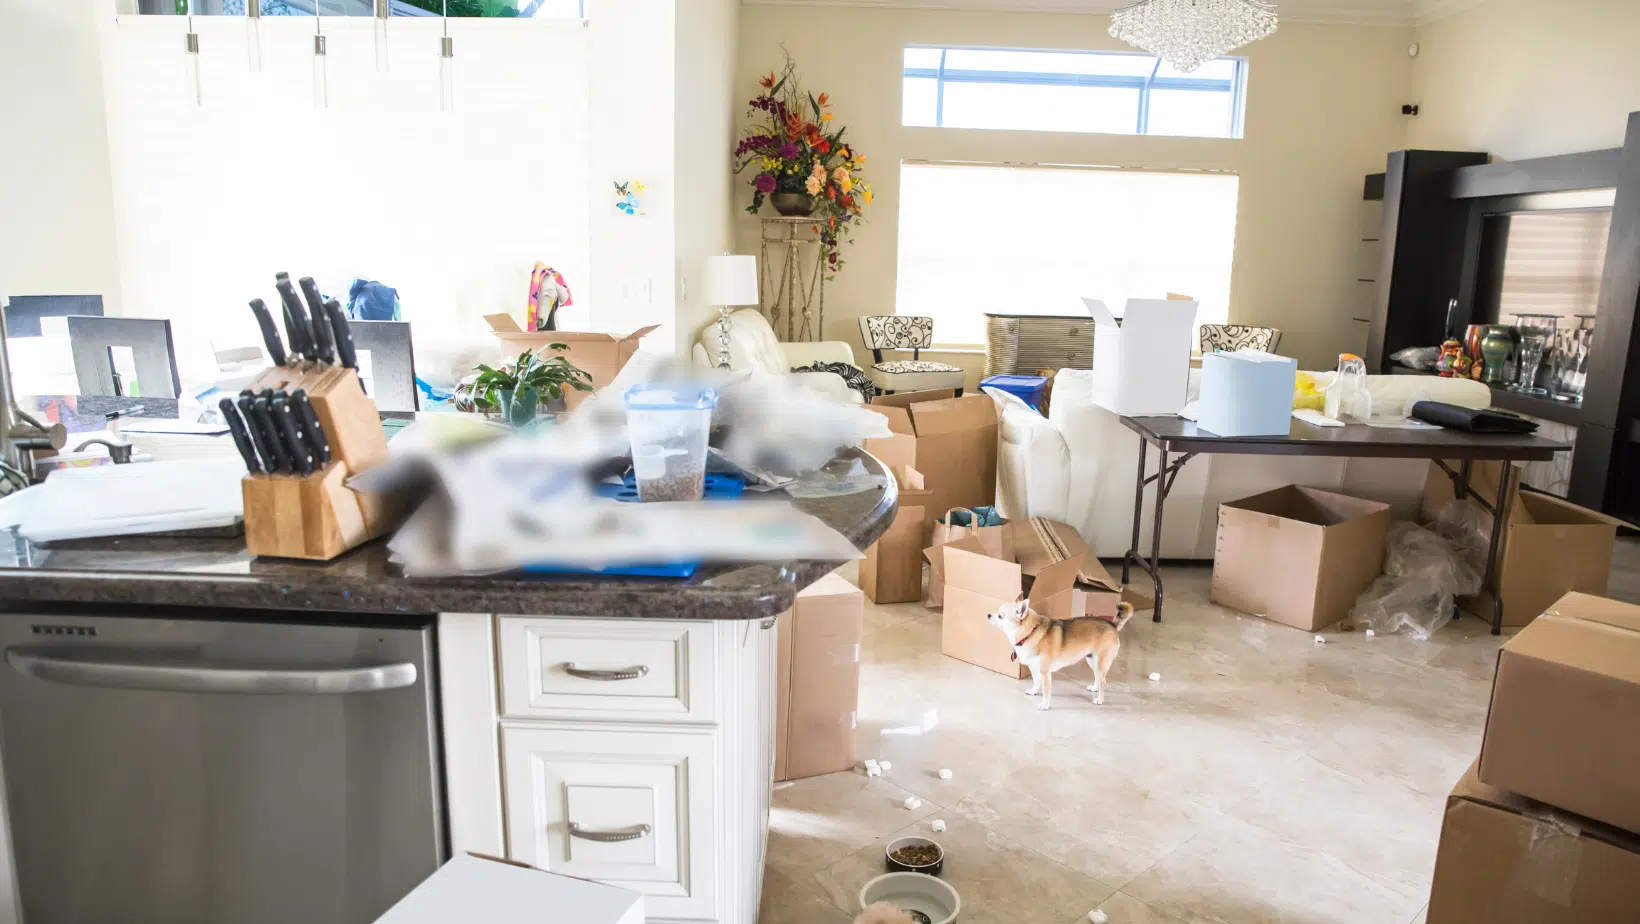 These Are The Top Areas Your Guests Will Judge You For If They're Dirty...